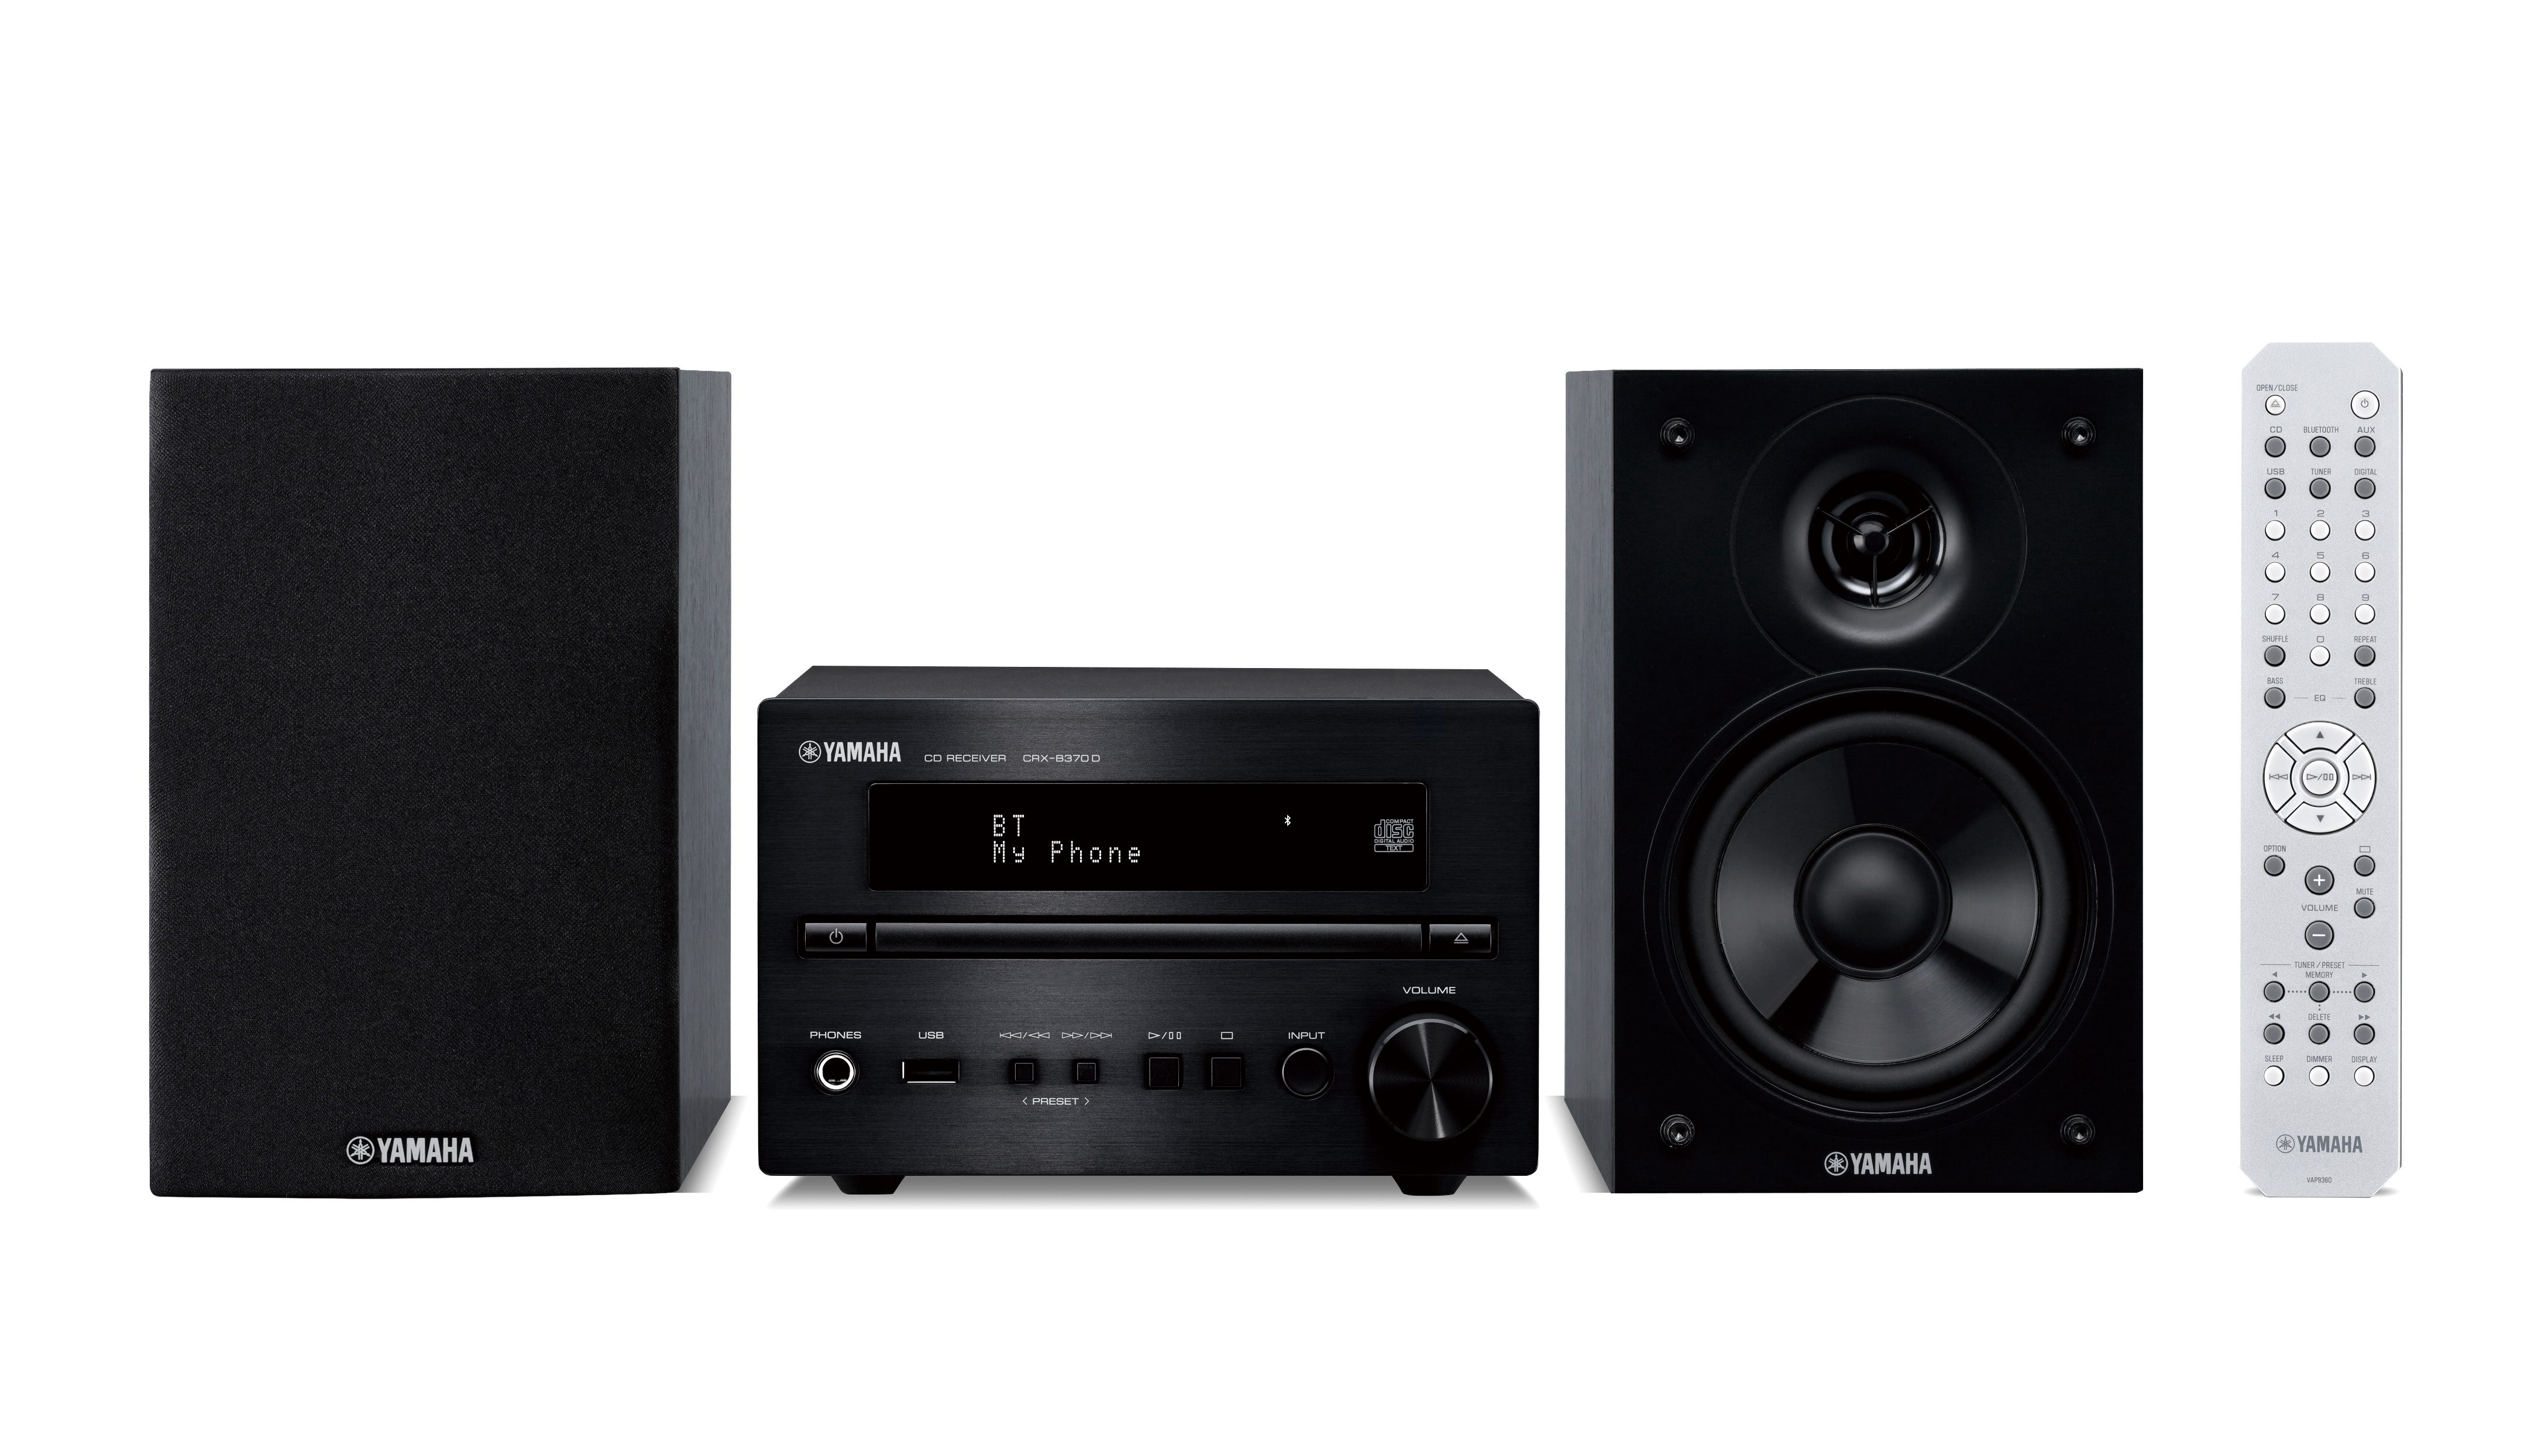 MCR-B270D - Overview - HiFi Systems - Audio & Visual - Products - Yamaha -  Other European Countries